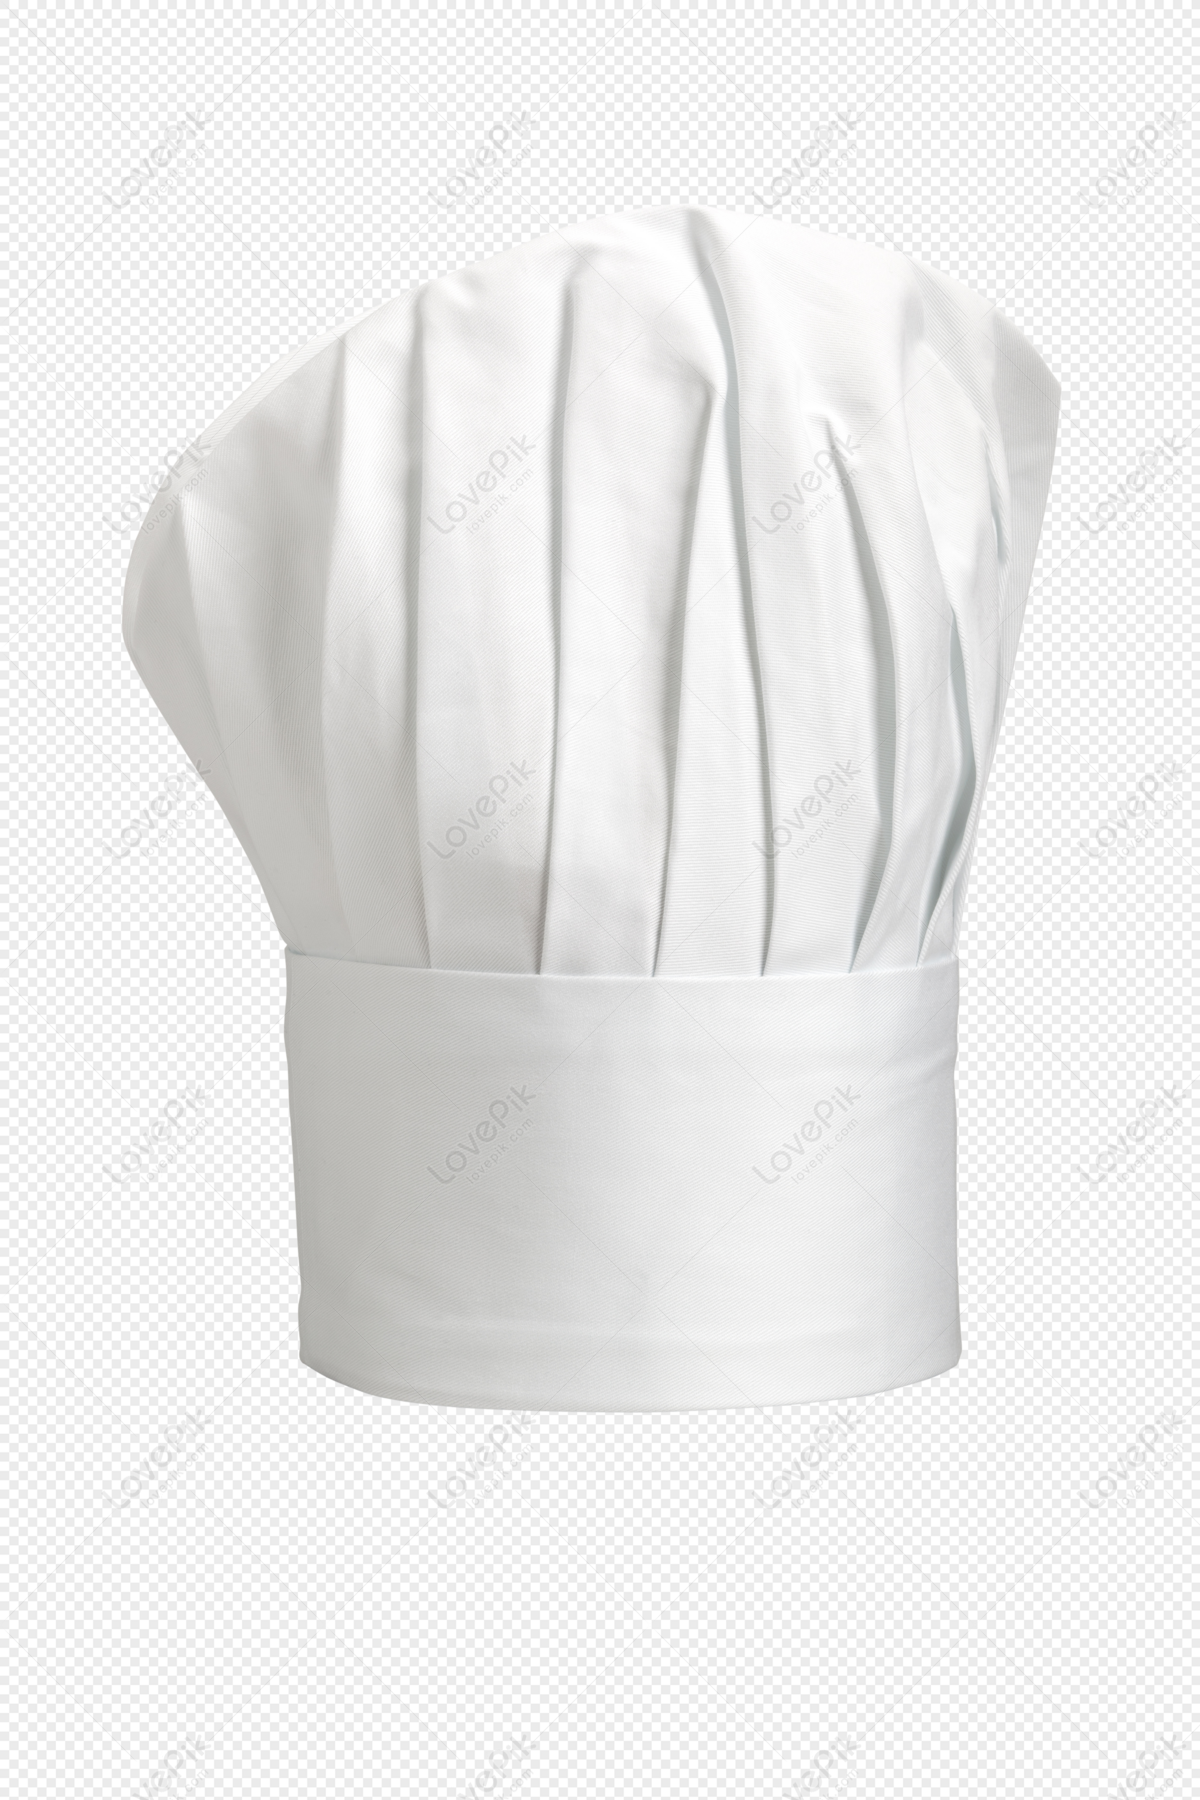 Chef hat toque and cutlery Royalty Free Vector Image